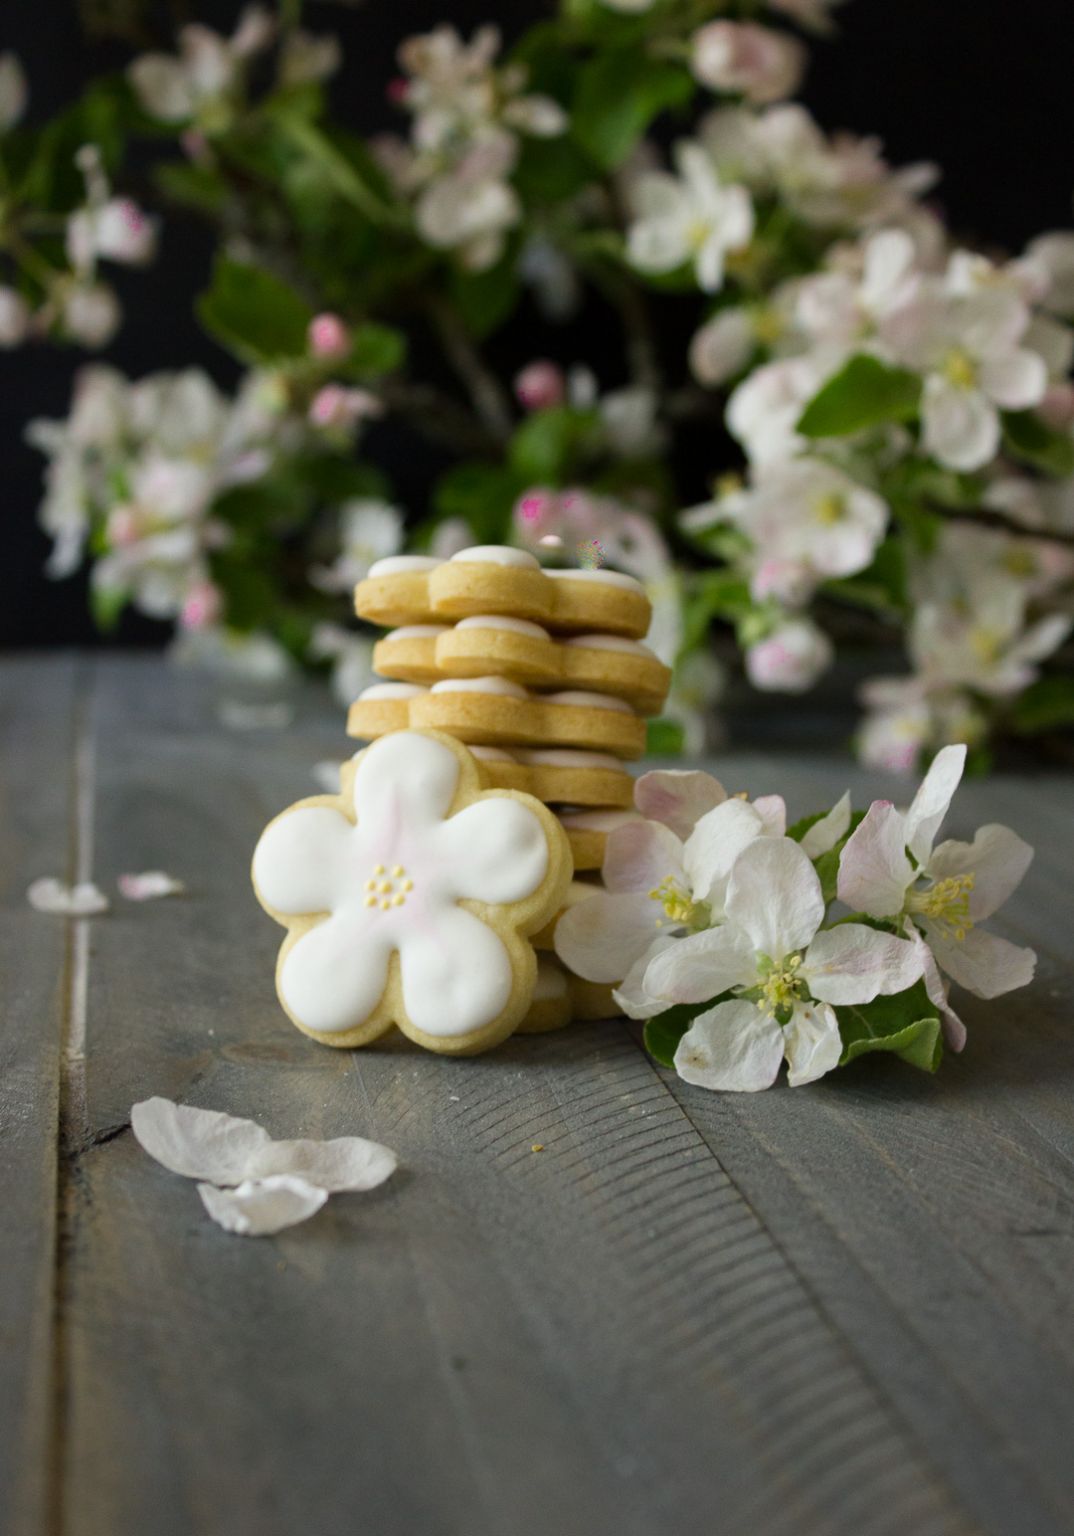 Apple Blossom Sugar Cookies are the most delicious way to celebrate spring!